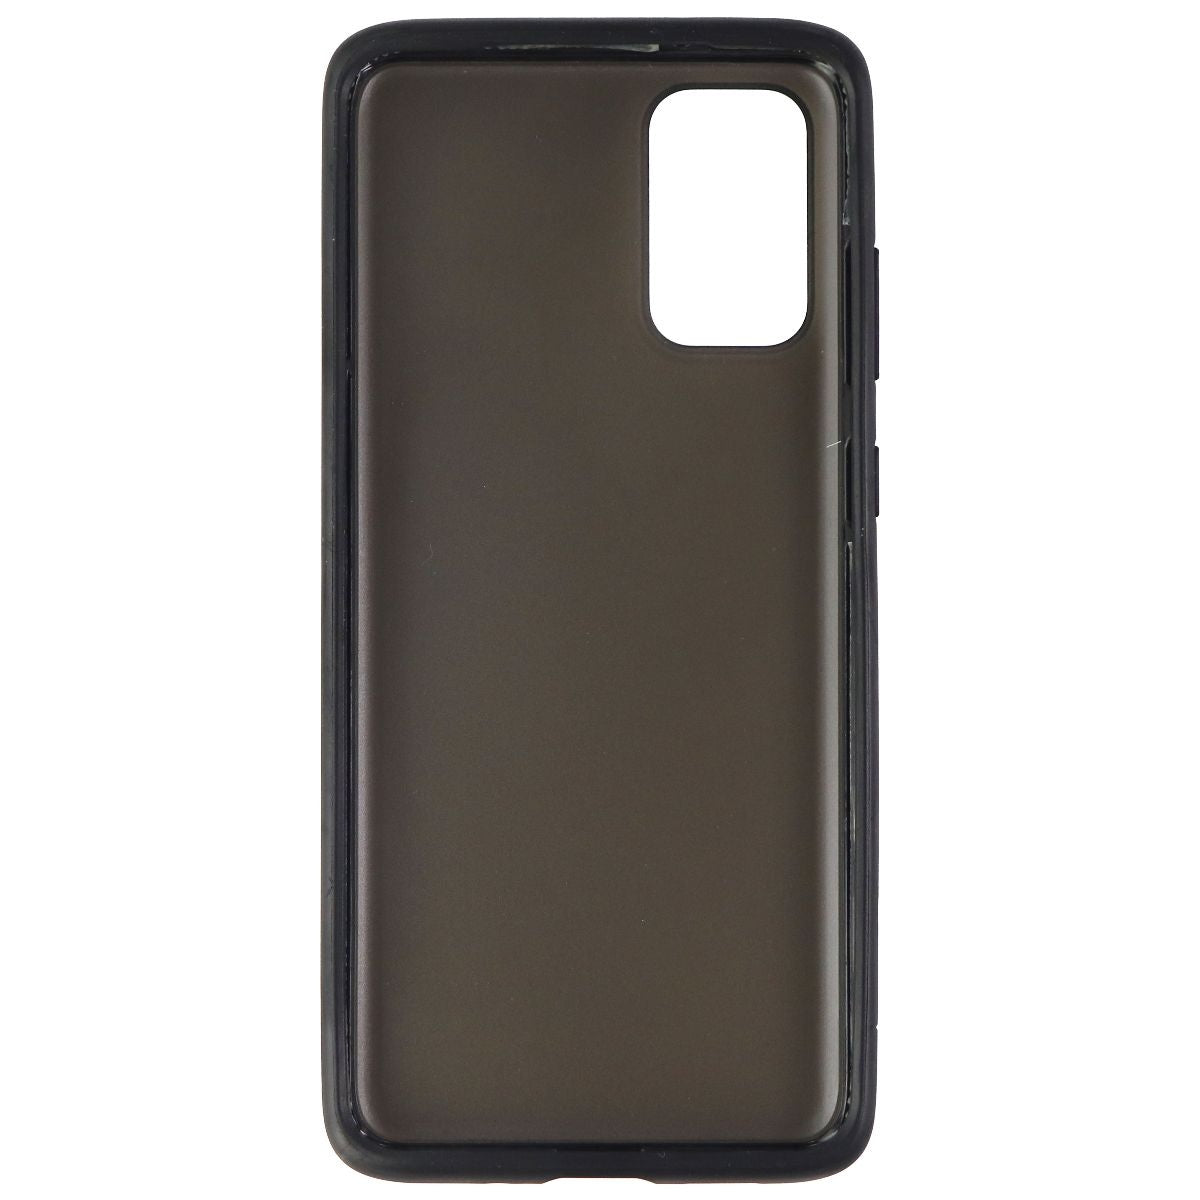 Impact Gel Crusader Chroma Series Case for Samsung Galaxy S20+ (Plus) - Black Cell Phone - Cases, Covers & Skins Impact Gel    - Simple Cell Bulk Wholesale Pricing - USA Seller